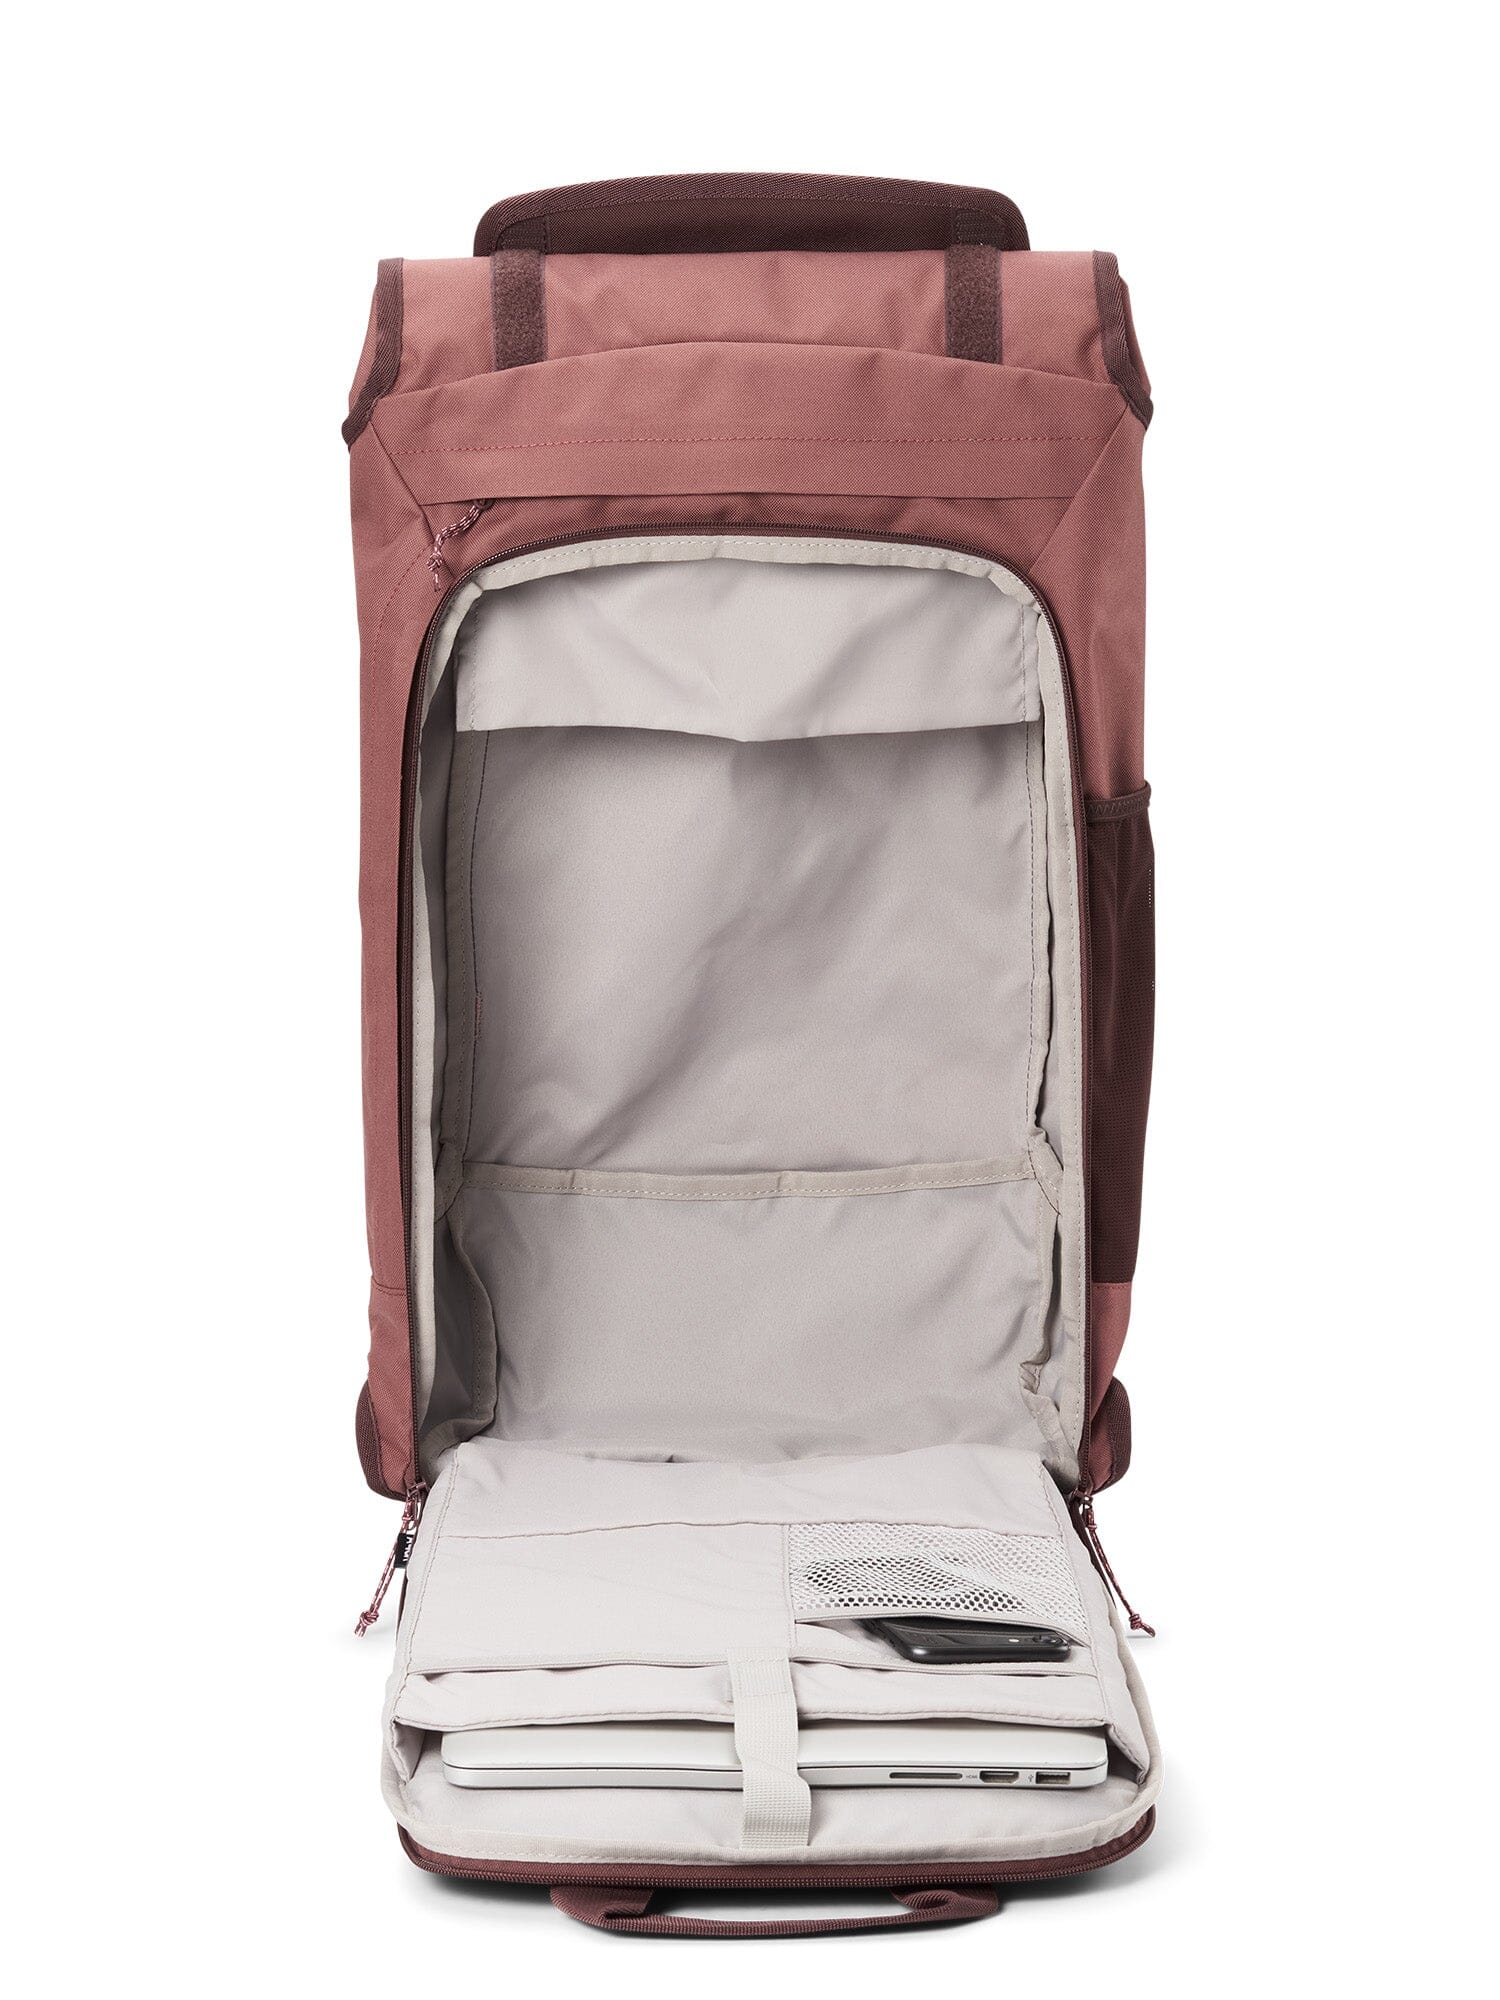 Aevor Trip Pack Backpack - Made from recycled PET-bottles Raw Ruby Bags